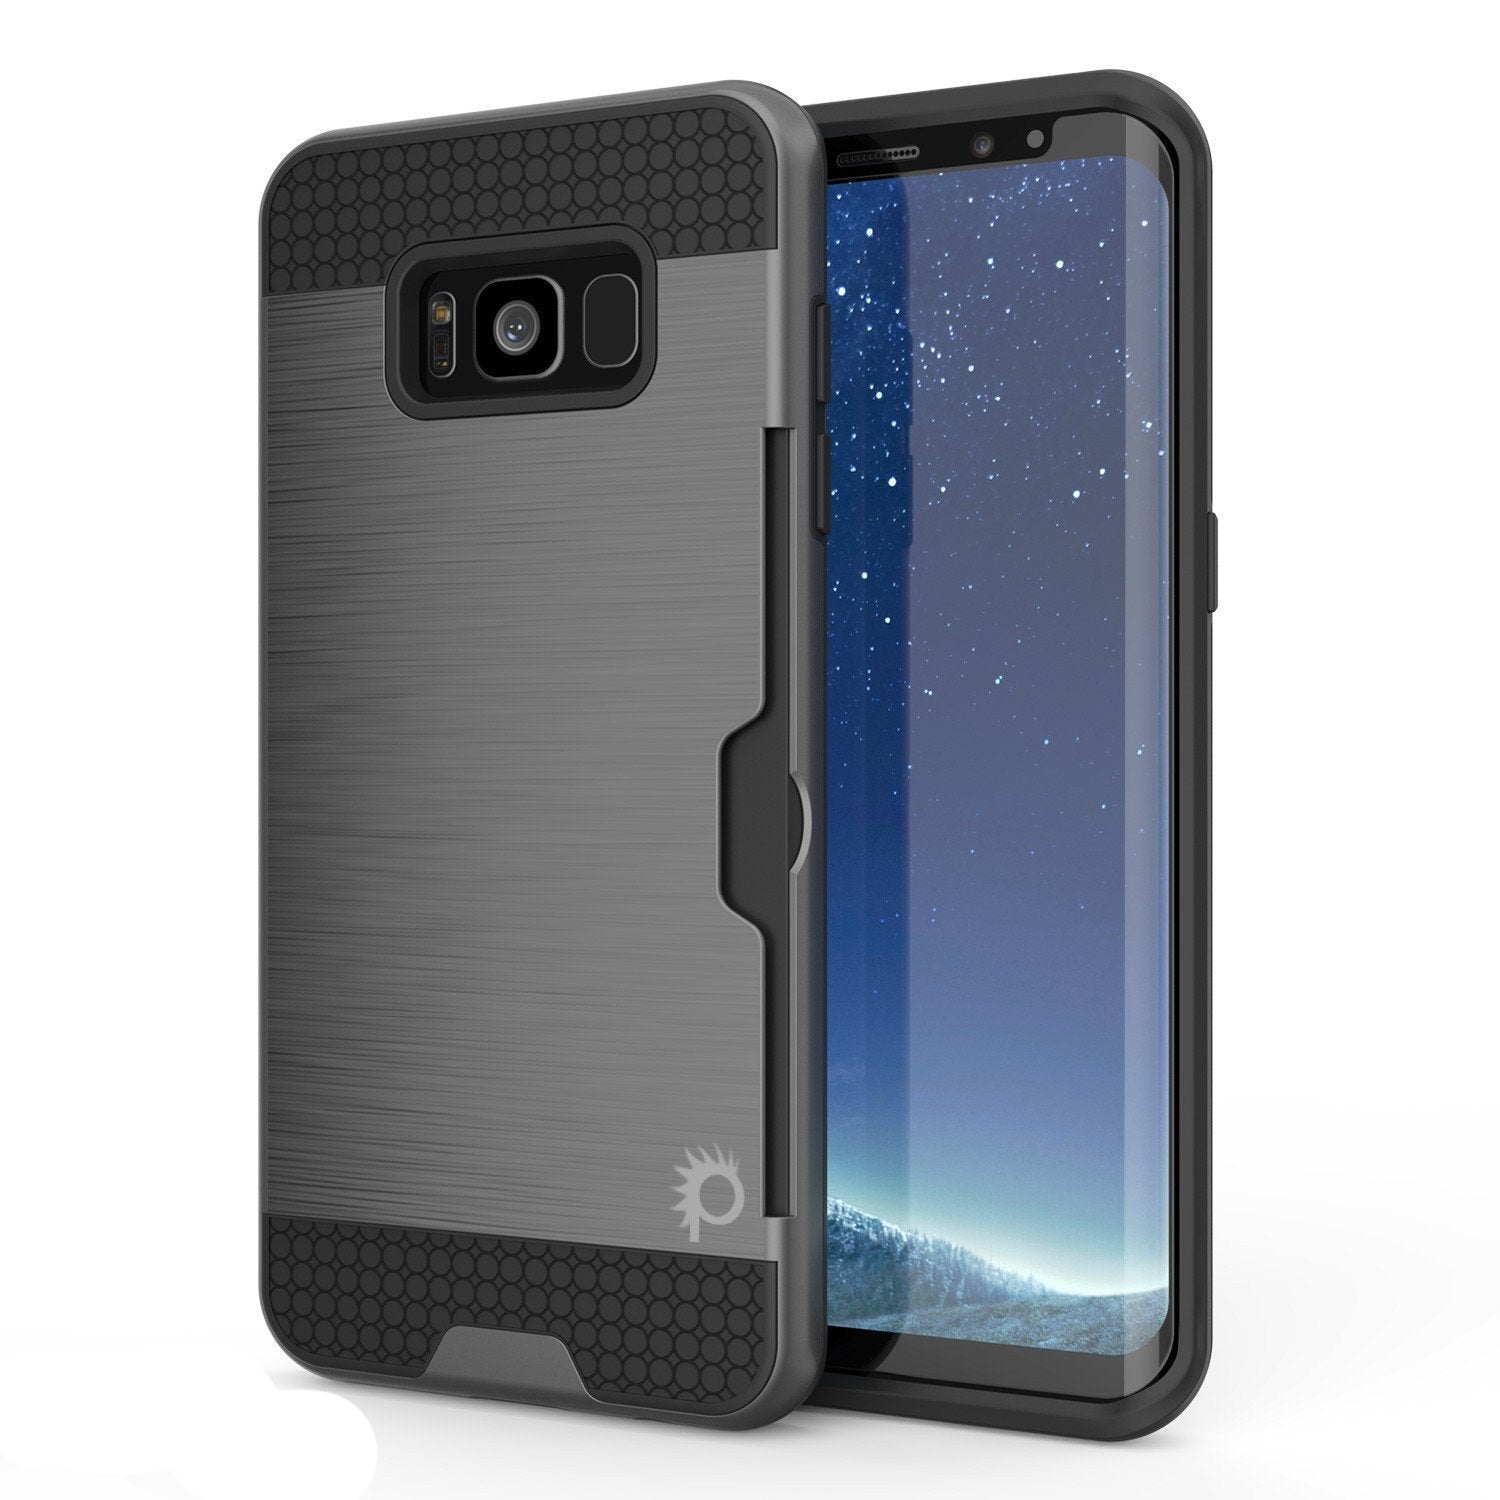 Galaxy S8 Plus Case, PUNKcase [SLOT Series] [Slim Fit] Dual-Layer Armor Cover w/Integrated Anti-Shock System, Credit Card Slot [Grey] (Color in image: Grey)